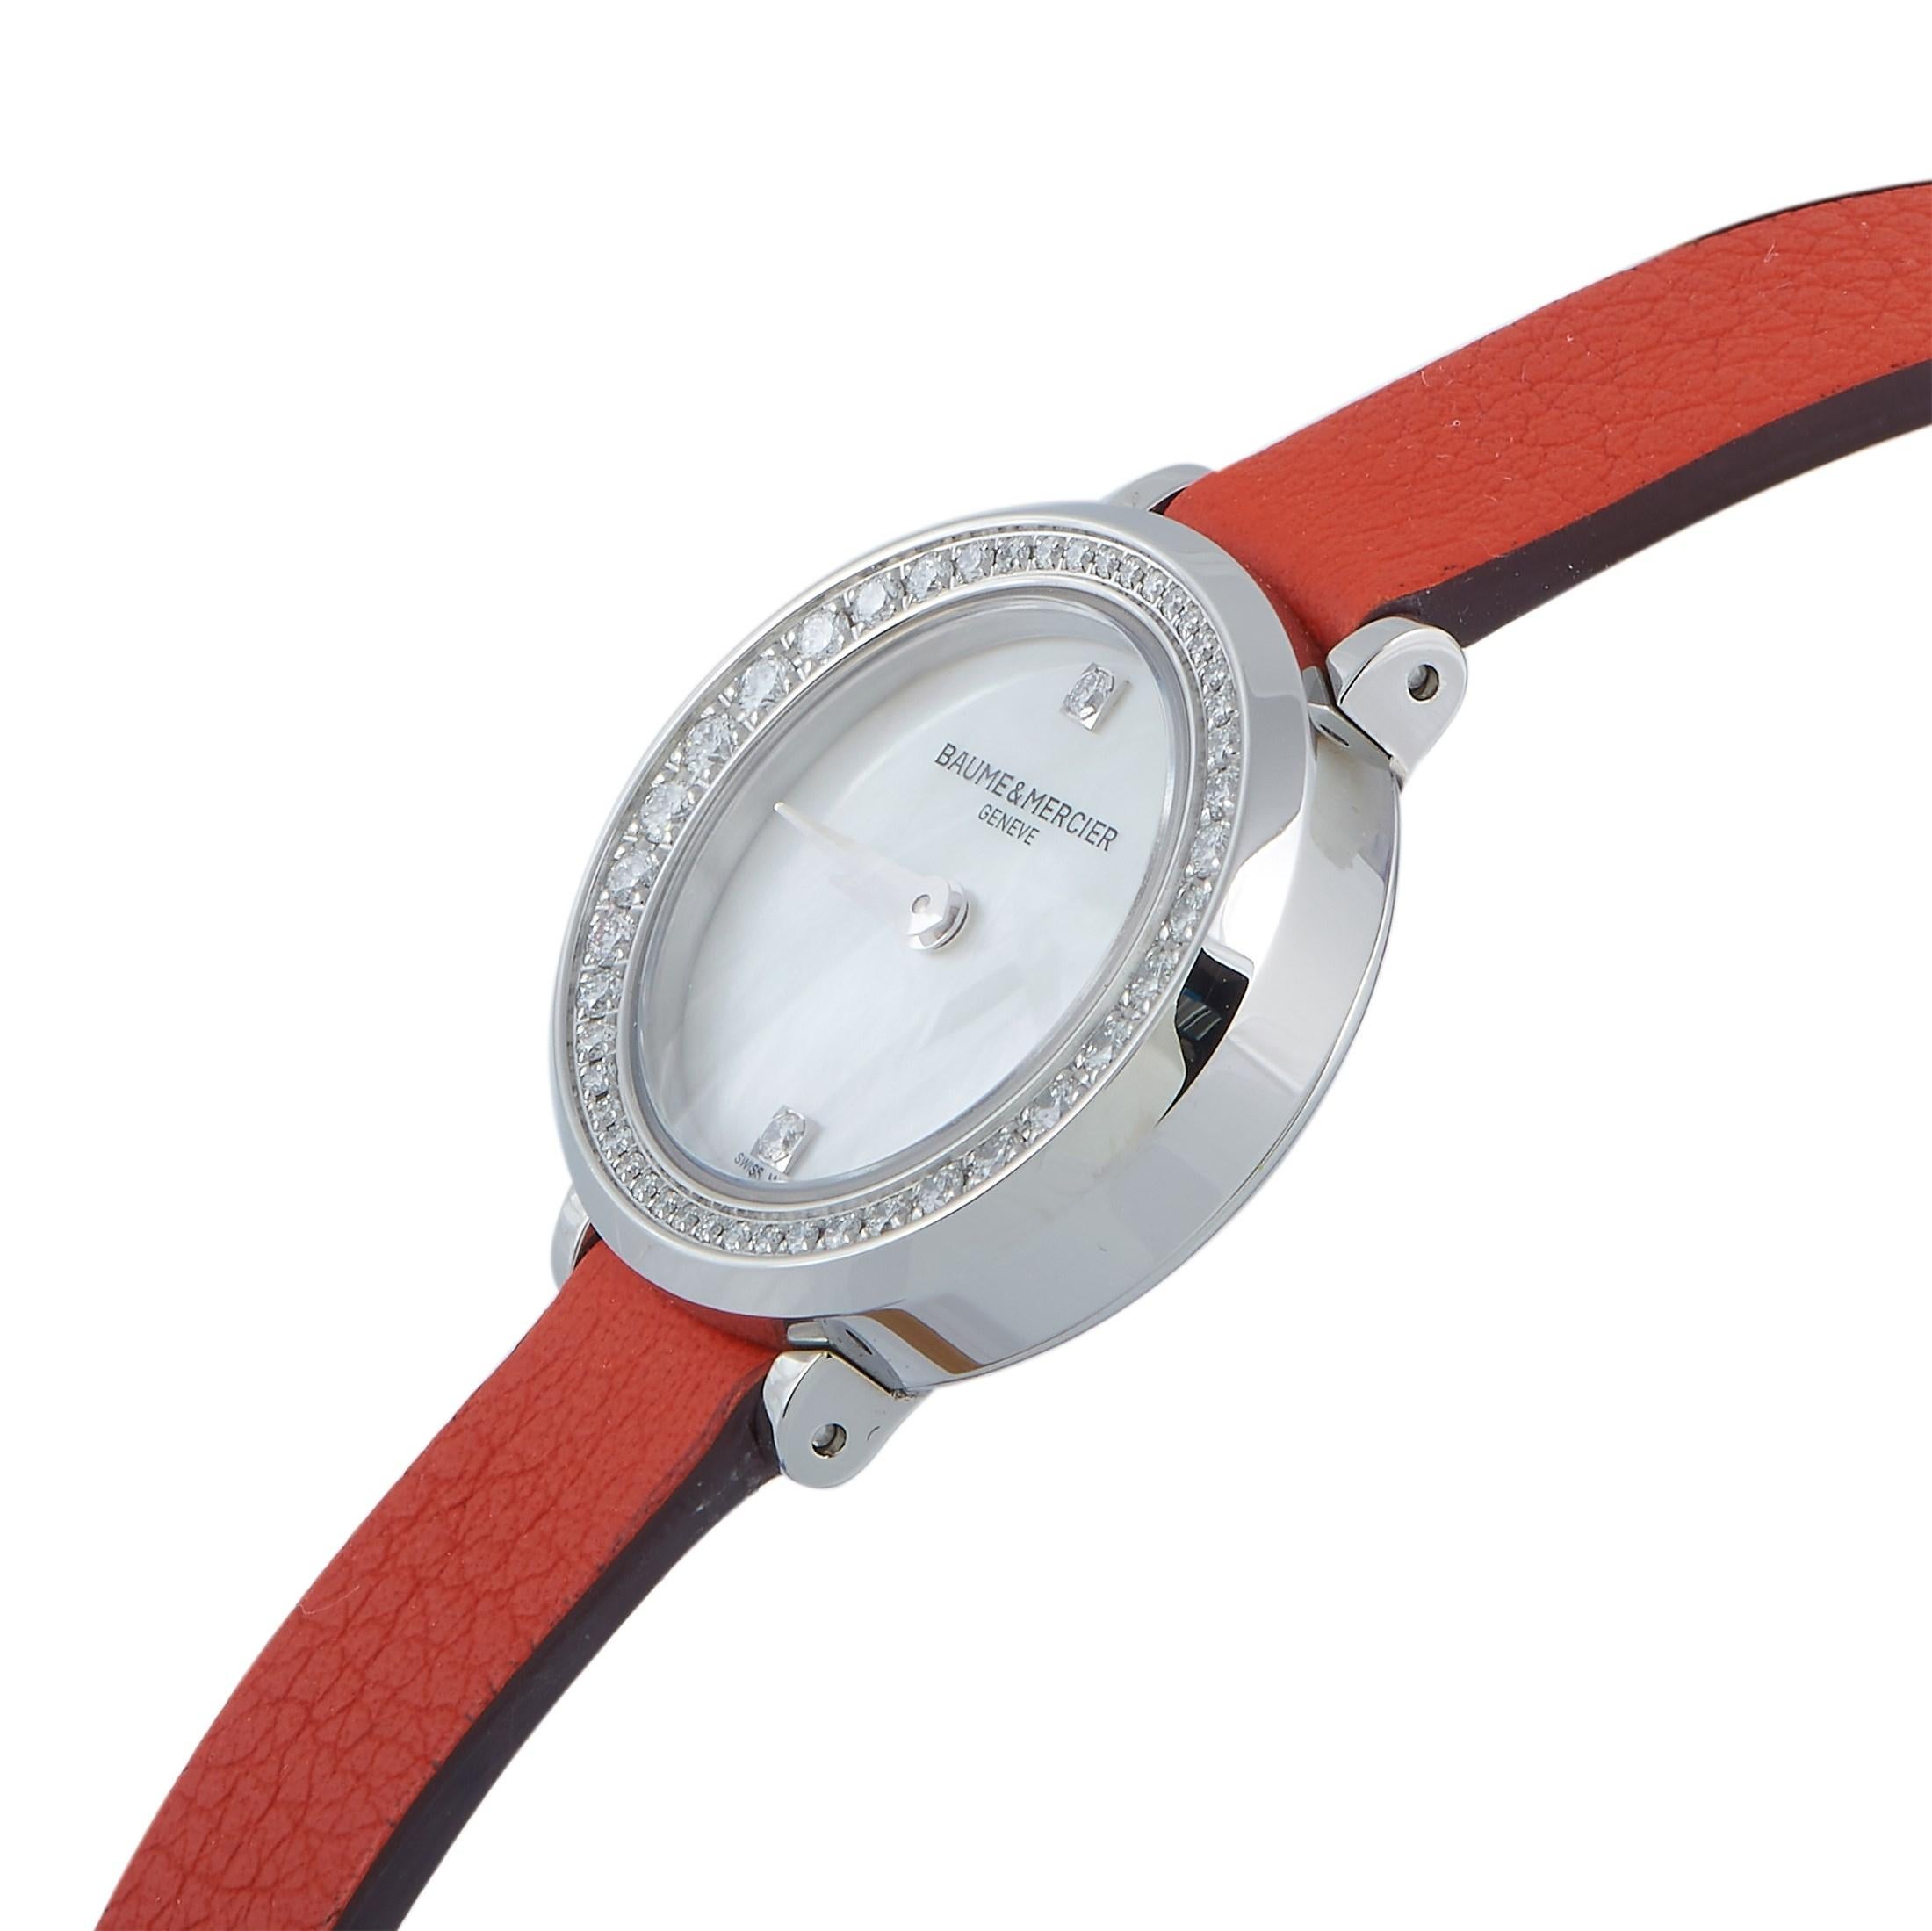 This is the Baume & Mercier Petite Promesse timepiece, reference number M0A10290.

The watch comes with a diamond-embellished stainless steel case that measures 22 mm in diameter. The case is mounted onto a wrap-around orange calfskin strap, secured